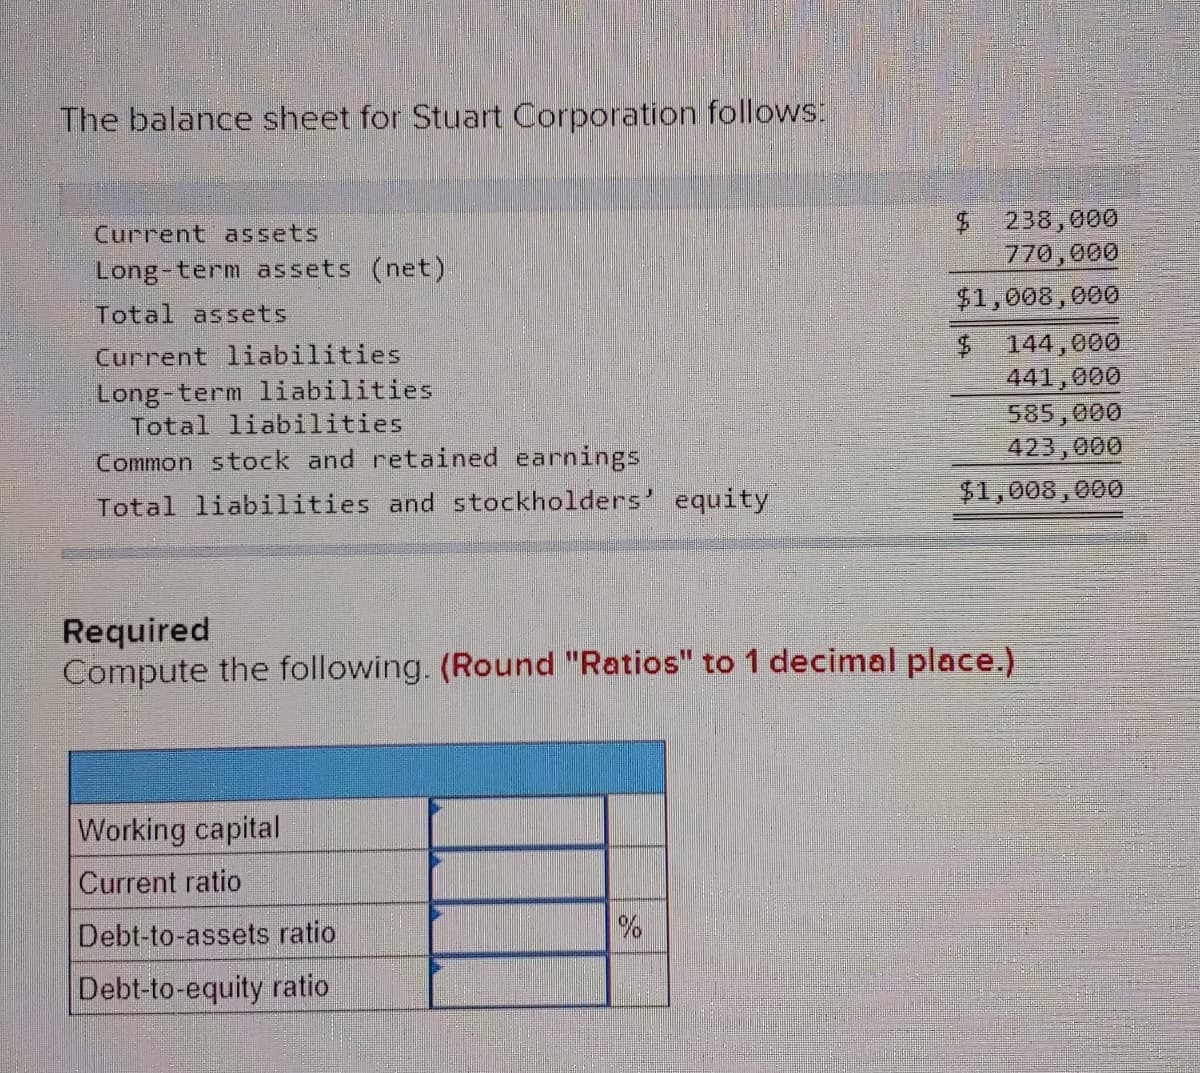 The balance sheet for Stuart Corporation follows:
Current assets
Long-term assets (net)
Total assets
Current liabilities
Long-term liabilities
Total liabilities
Common stock and retained earnings
Total liabilities and stockholders' equity
Working capital
Current ratio
Debt-to-assets ratio
Debt-to-equity ratio
$ 238,000
770,000
$1,008,000
Required
Compute the following. (Round "Ratios" to 1 decimal place.)
%
144,000
441,000
585,000
423,000
$1,008,000